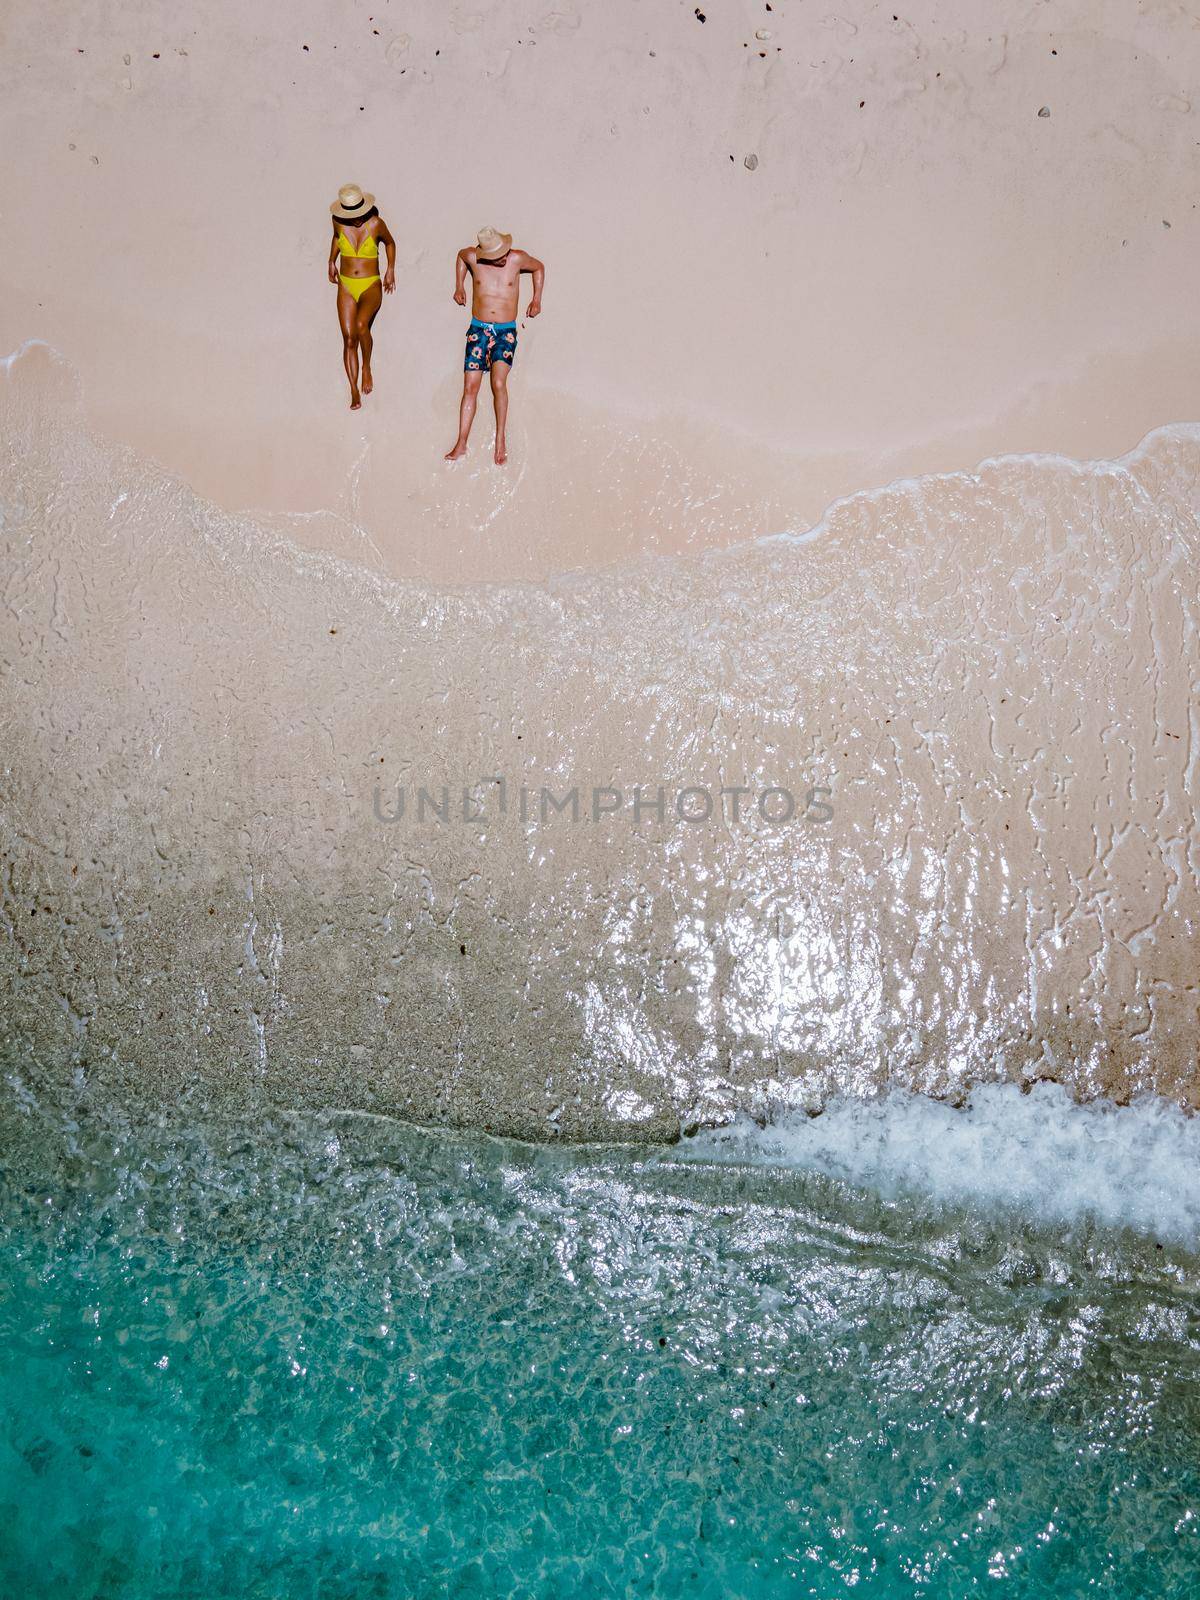 Playa Kalki Curacao tropical Island in the Caribbean sea, Playa Kalki western side of Curacao Caribbean Dutch Antilles azure ocean, drone aerial view of couple men and woman on the beach from above